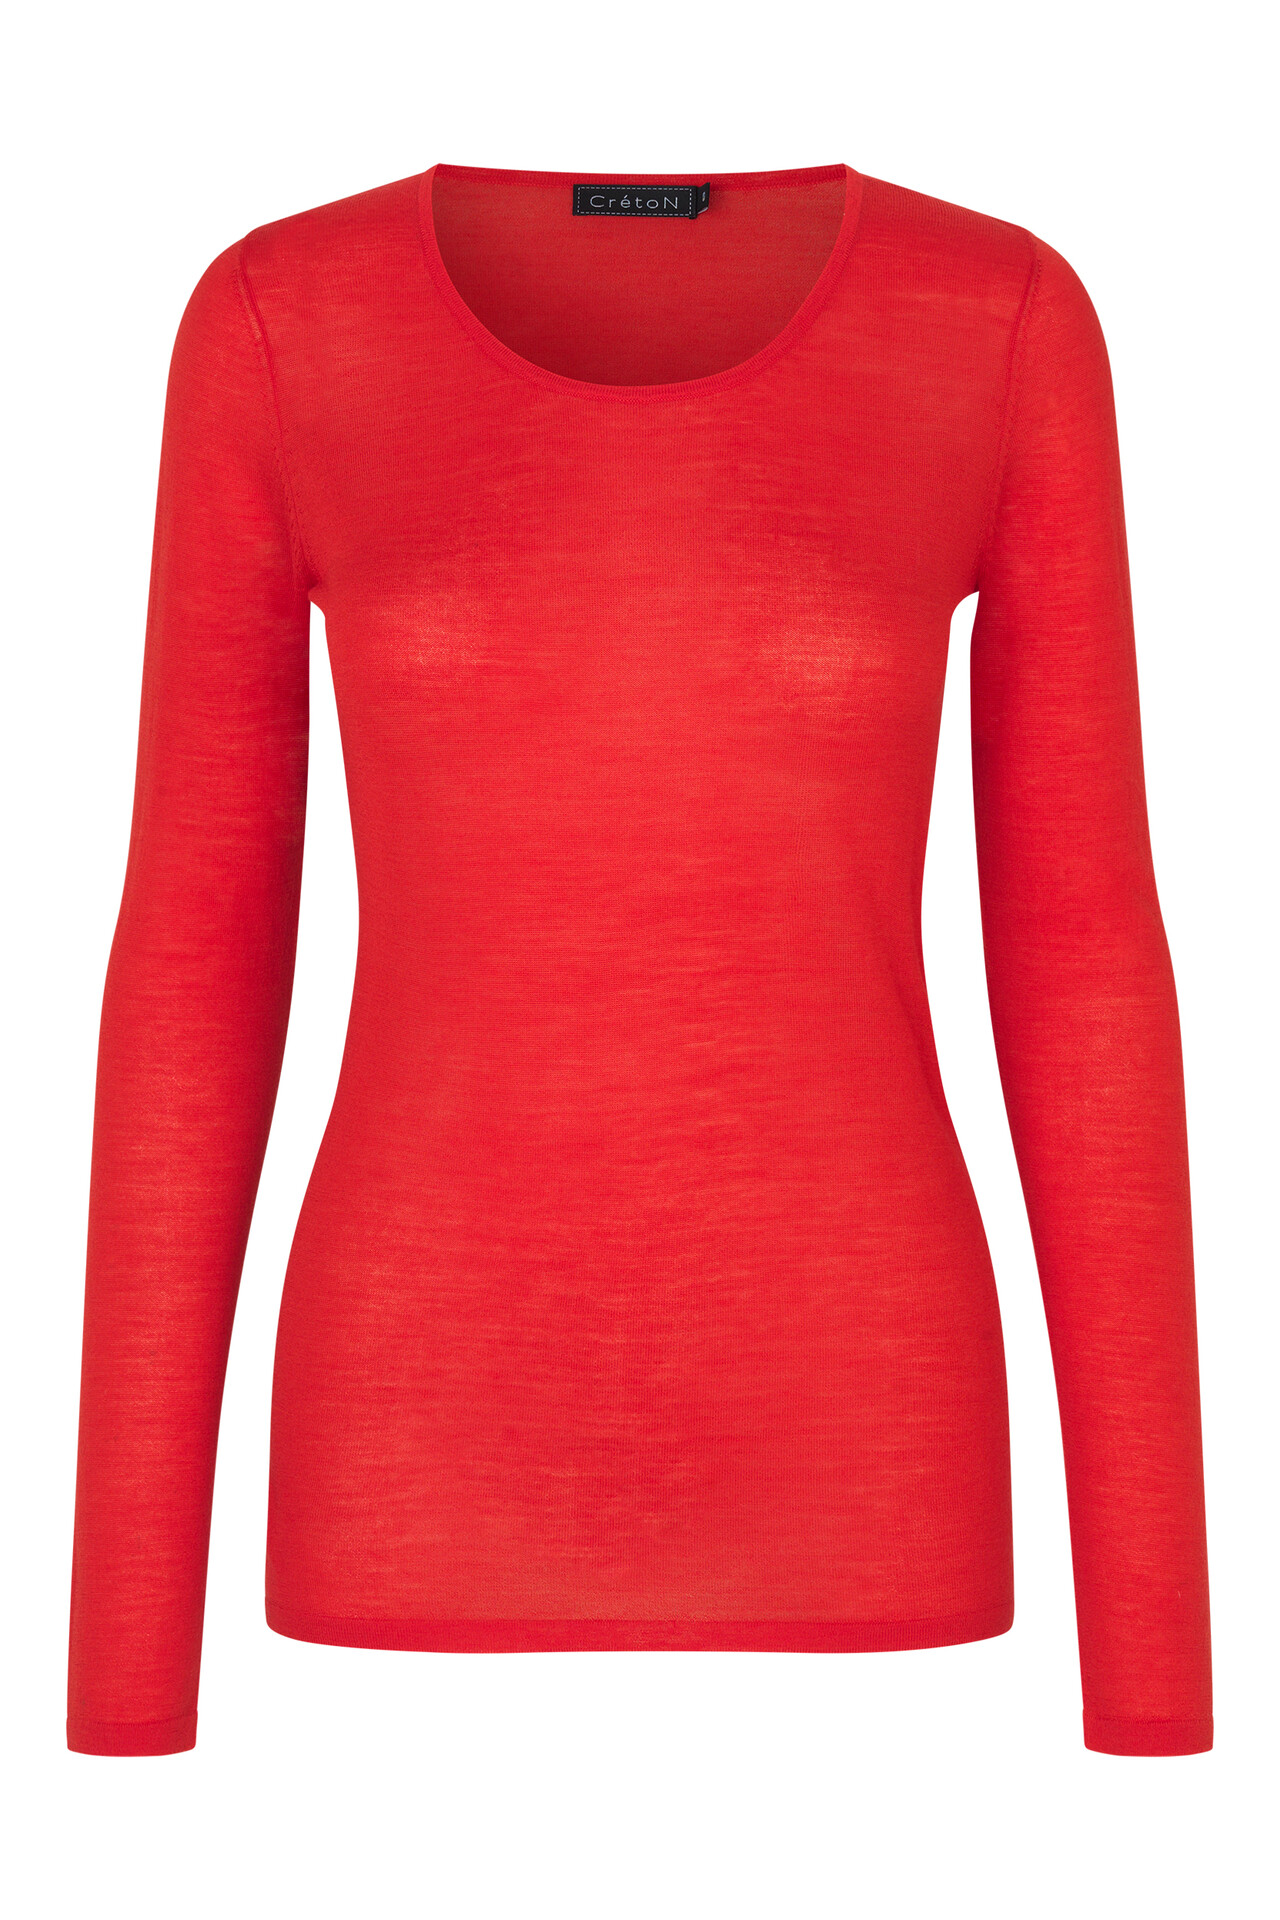 CRÉTON Indie merino bluse (POPPY RED L)